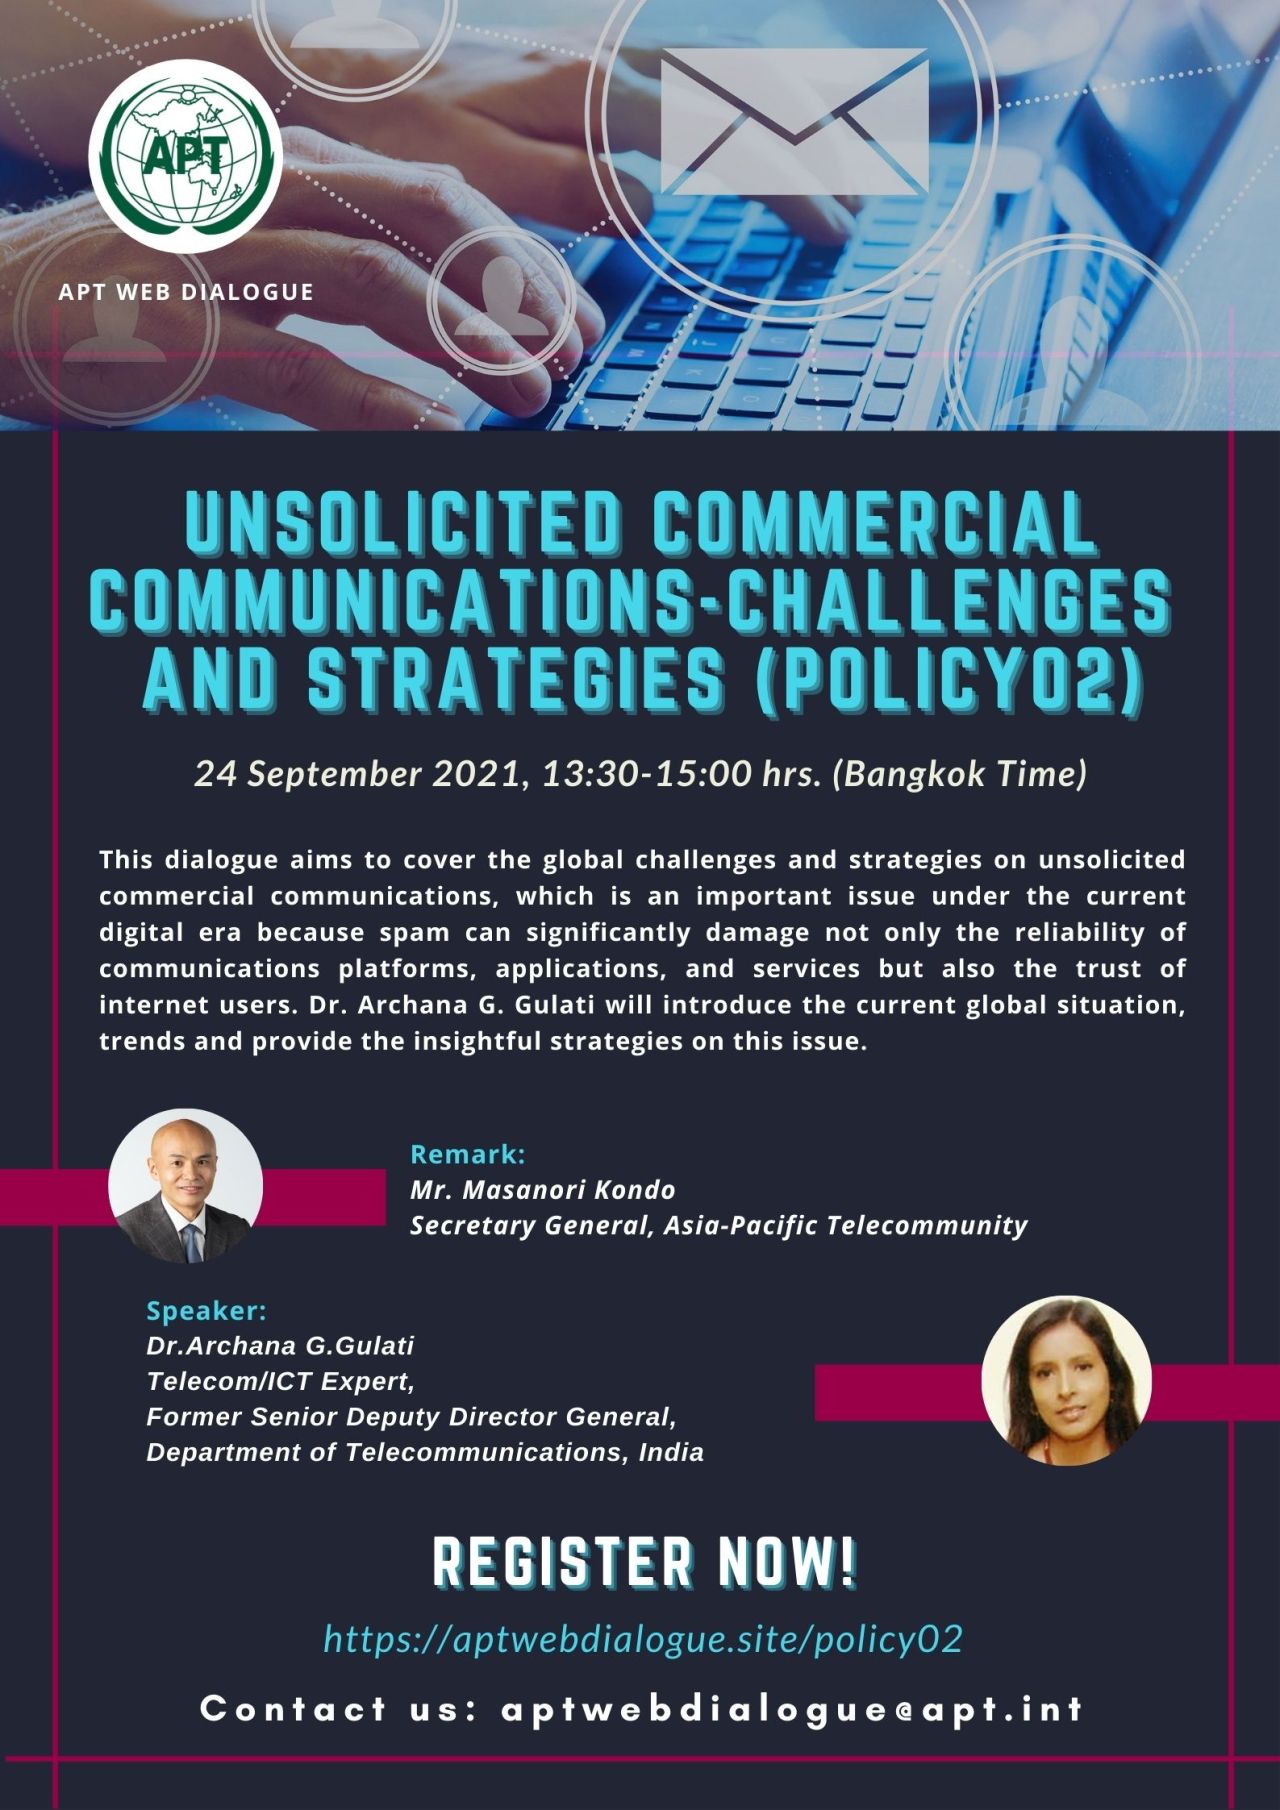 Unsolicited Commercial Communications-Challenges and Strategies